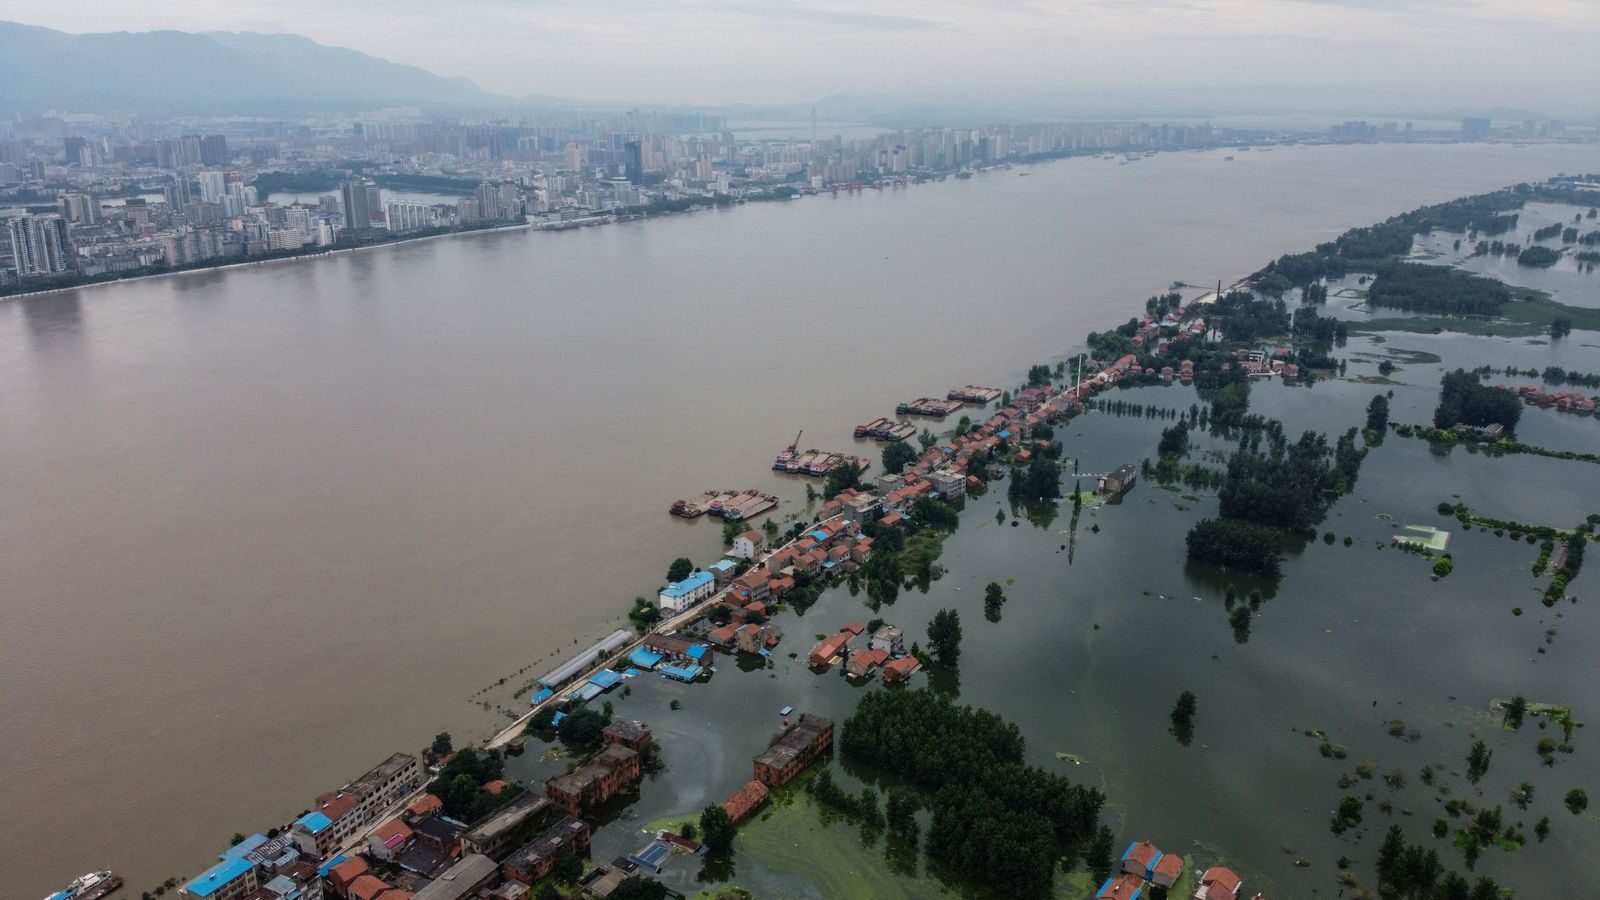 Vast swathes of China have been inundated by flooding along the Yangtze